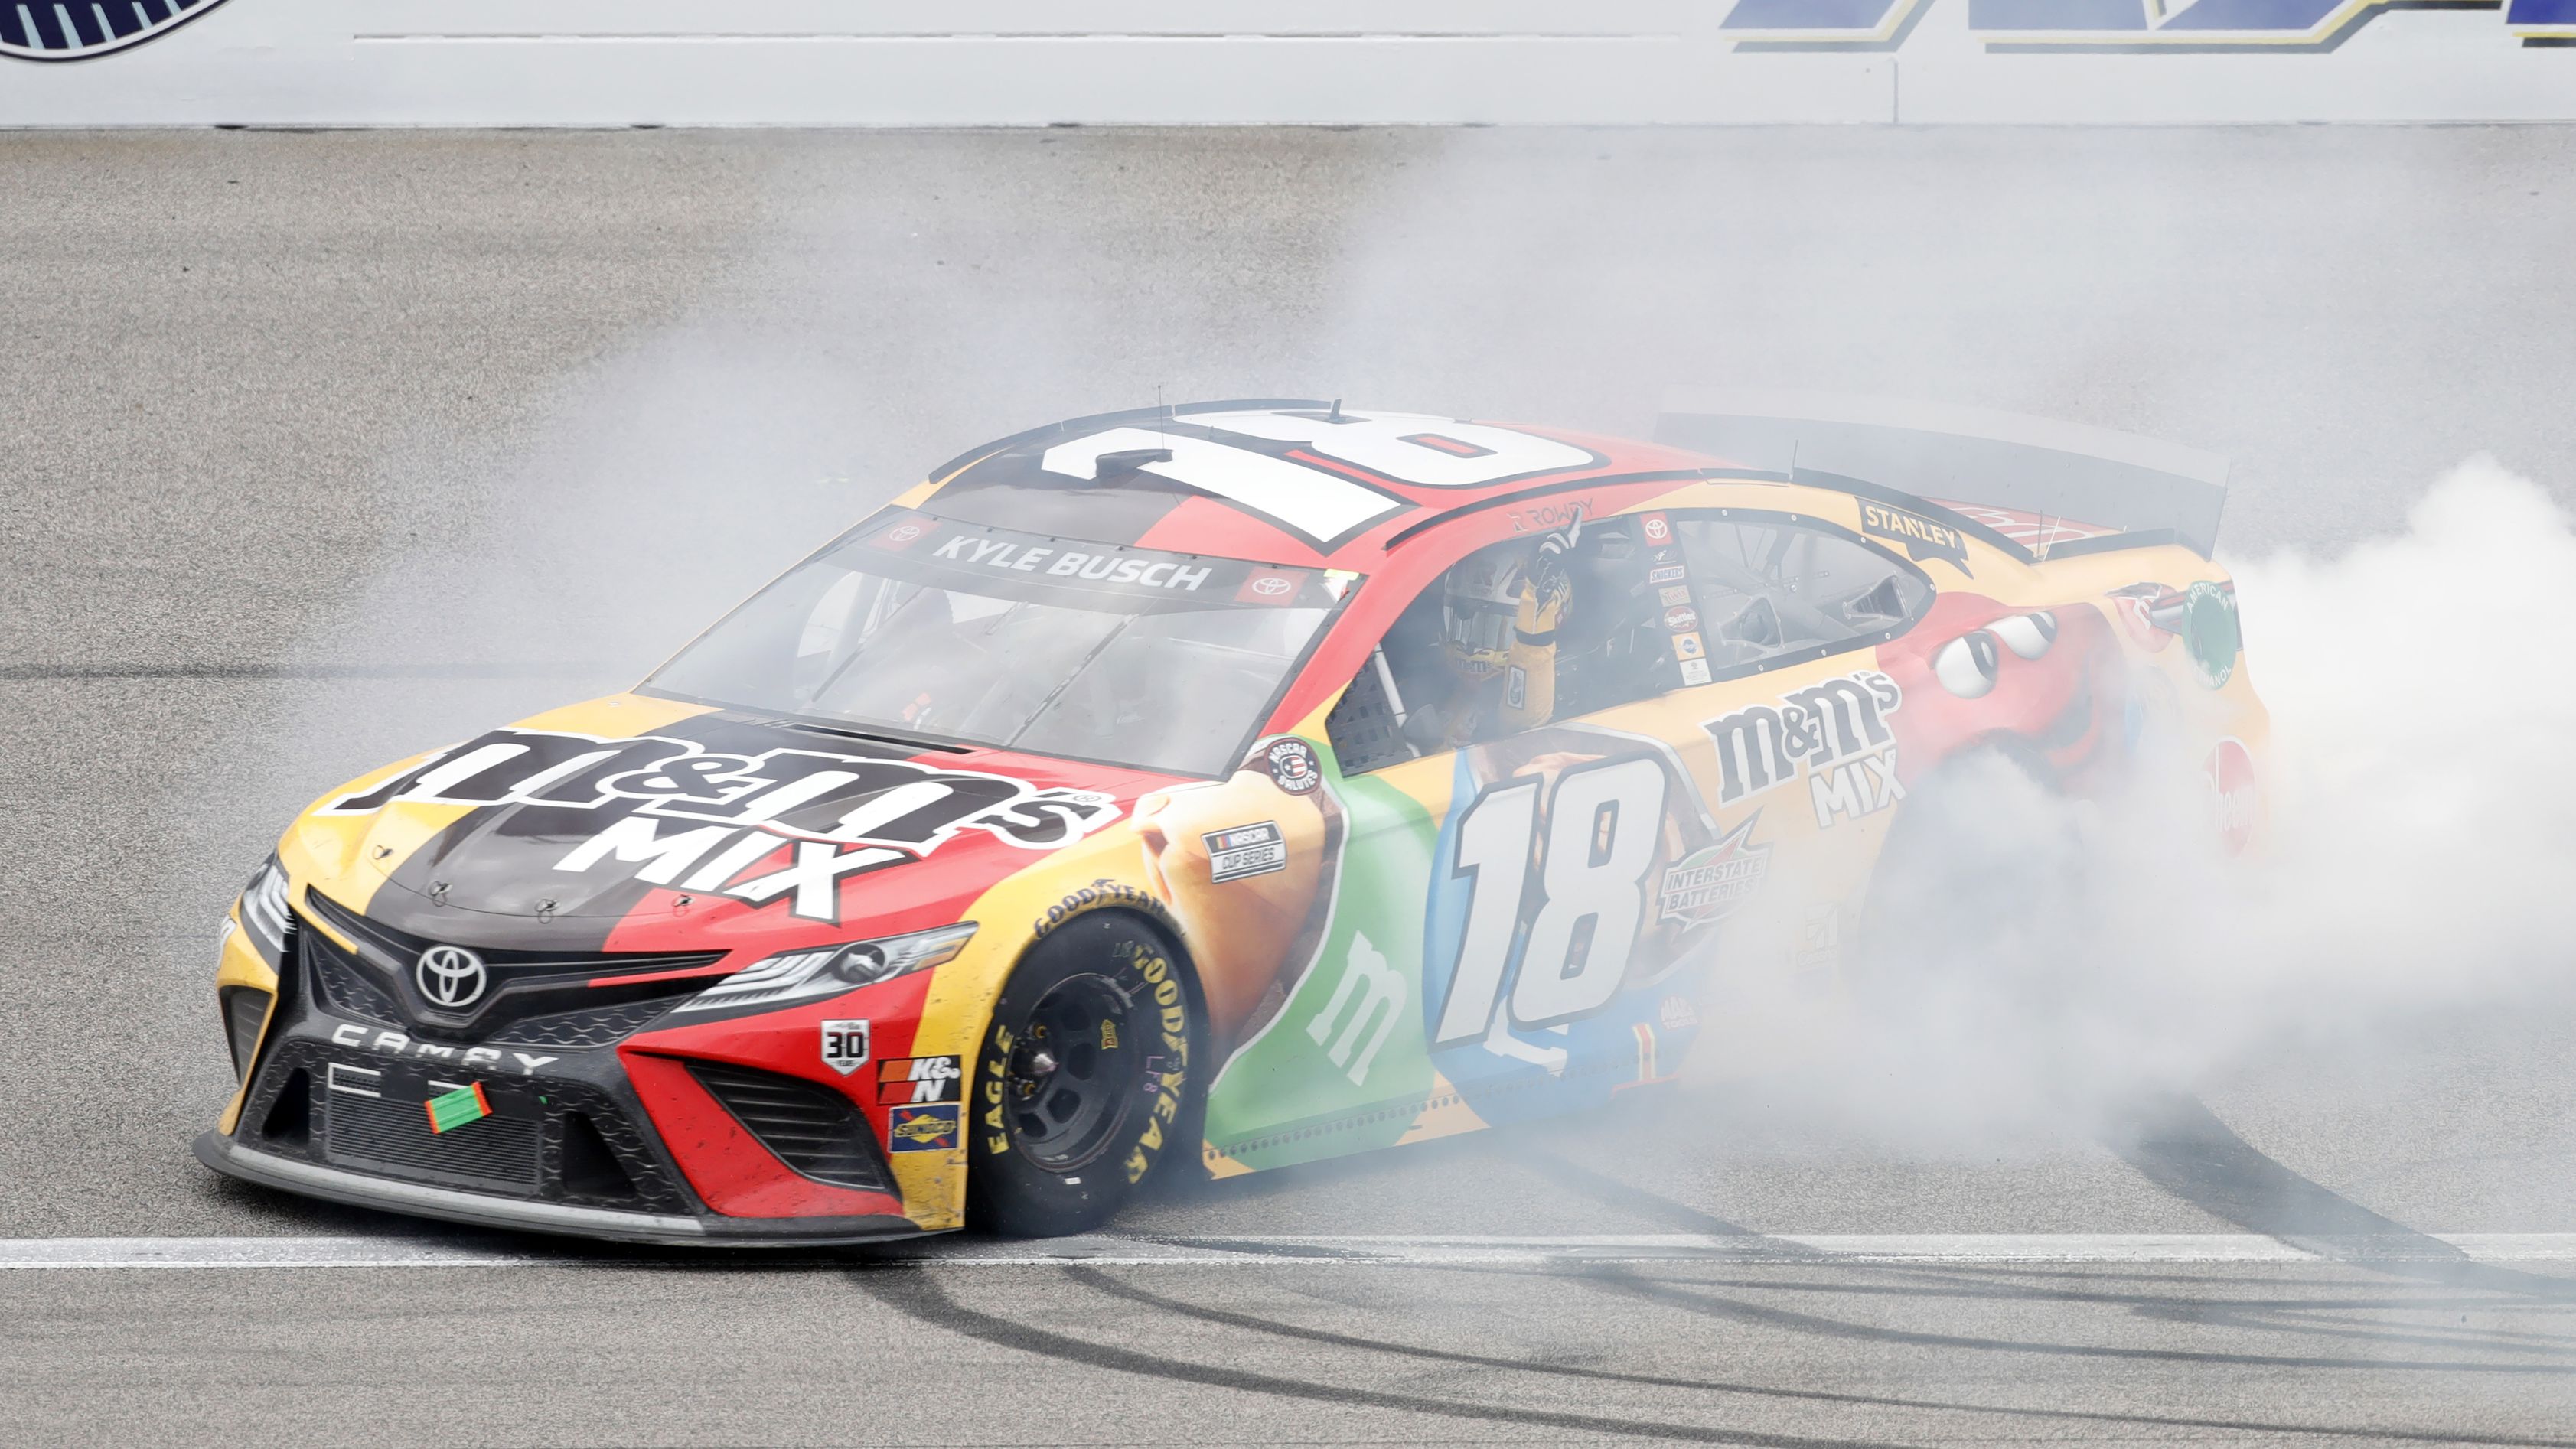 Kyle Busch will be allowed to race in the NASCAR Cup Series despite a prison sentence.